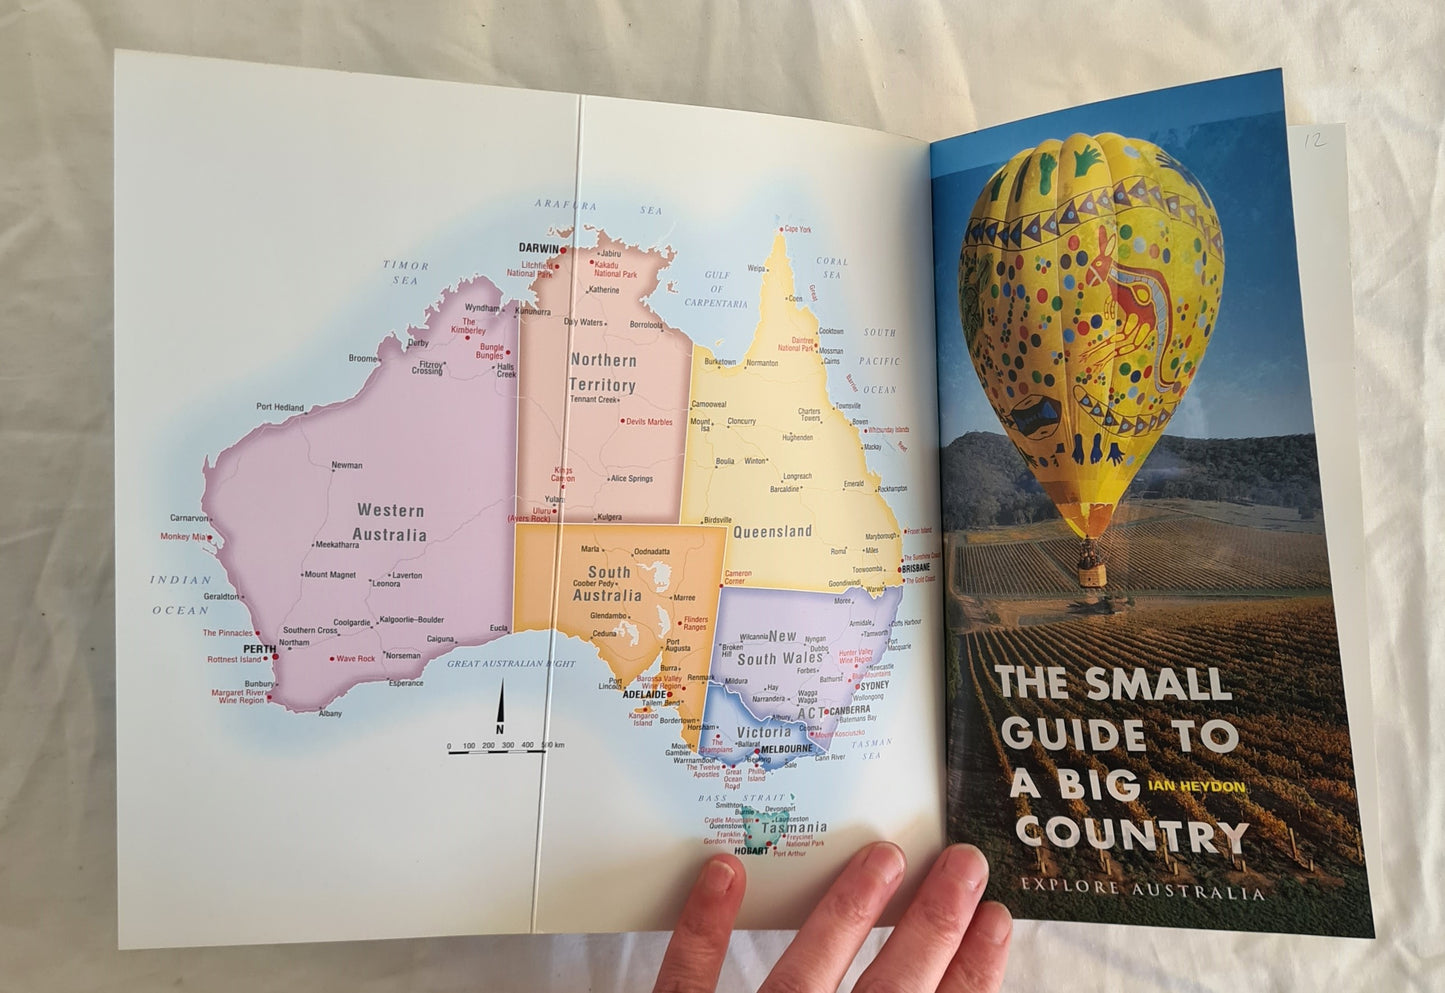 The Small Guide to a Big Country by Ian Heydon